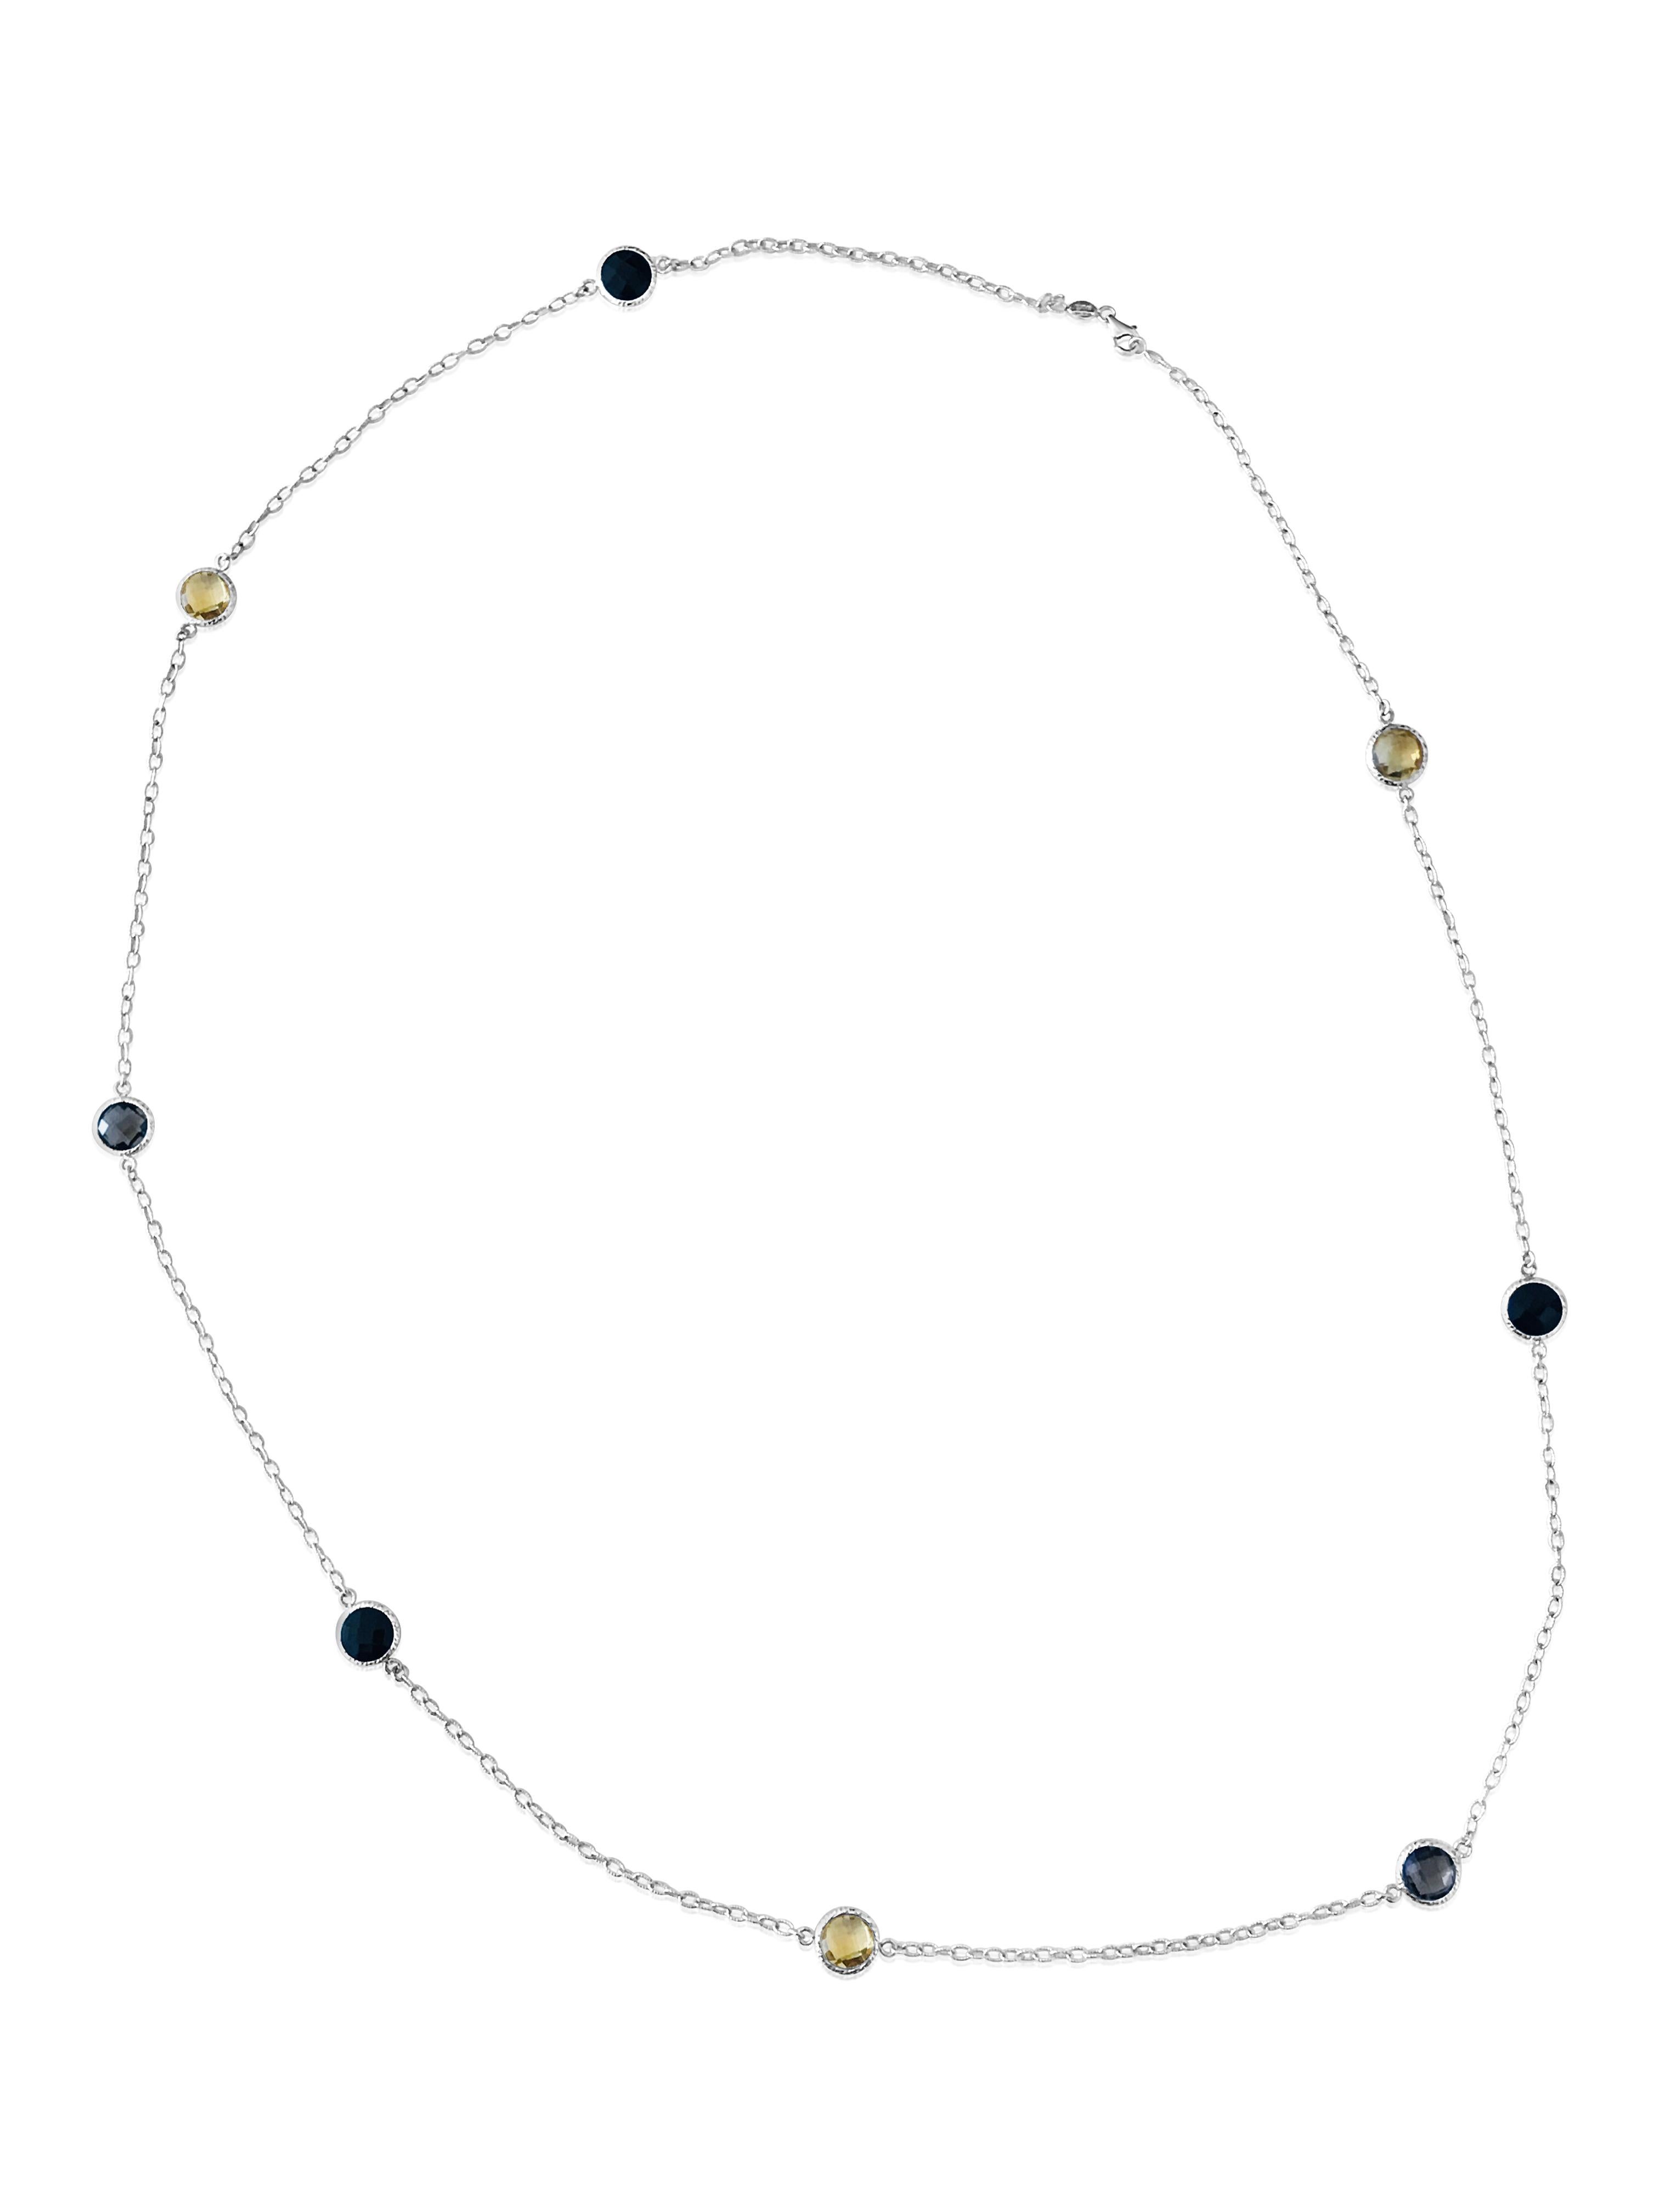 14k white gold. 20.00 carat weight total of the gemstones. 
Gemstones: Citrine, smokey quartz and onyx. 
Beautiful designer necklace. 
End to end length of the necklace: 38 inches. 
Total weight: 18.22 grams. Gorgeous one of kind ladies necklace.